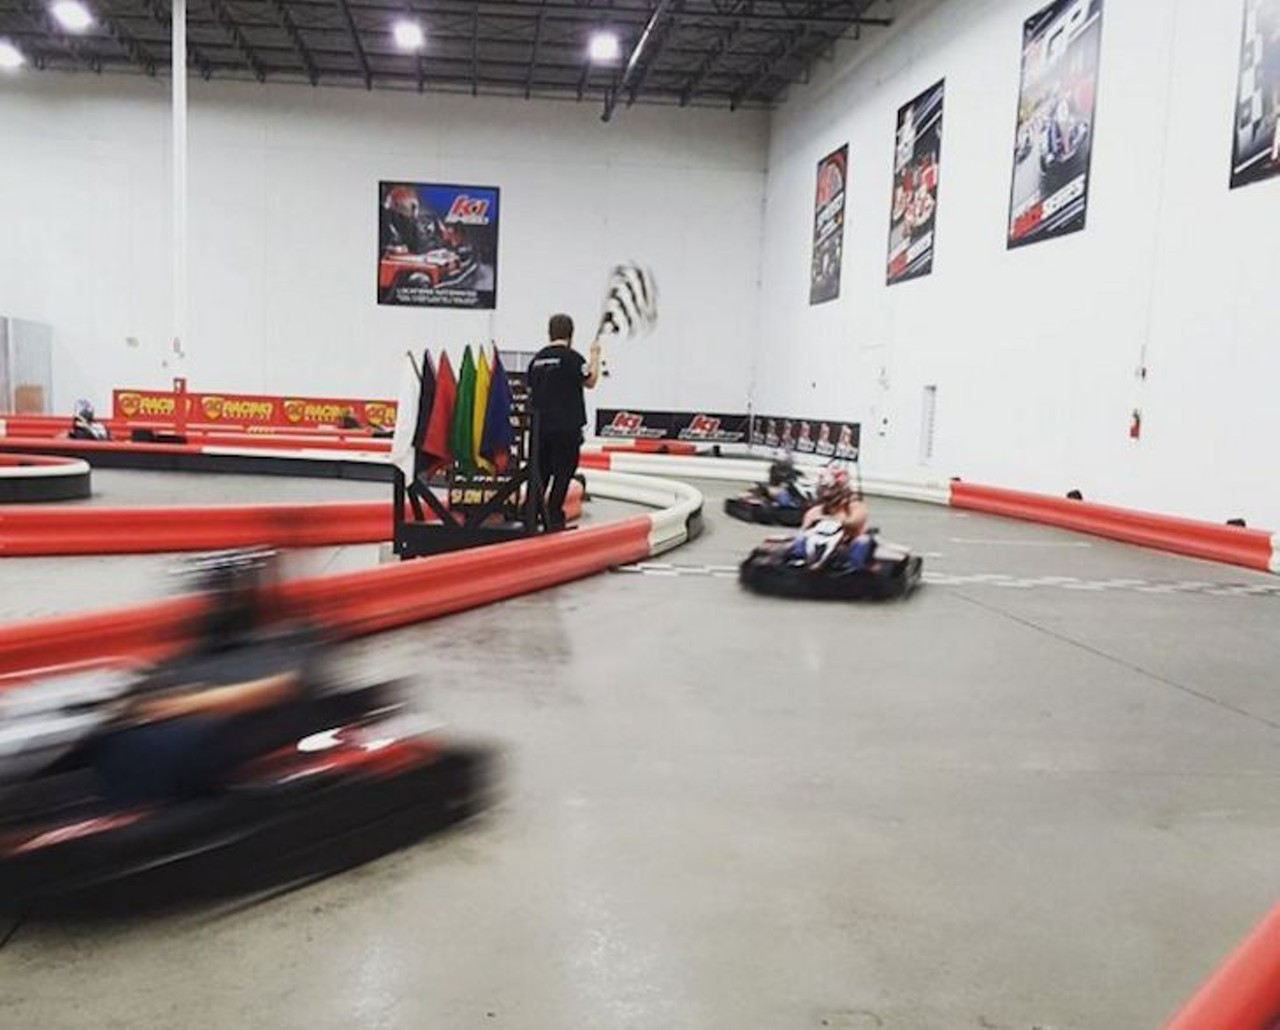 Live out your racing dreams at Orlando Grand Prix Indoor Go Karting 
9550 Parksouth Ct. Ste. 400, 407-434-7500, www.k1speed.com 
Nothing beats that rush of speeding around the racetrack and beating your friends on the go-kart. 
Photo via southdiamondwireless/Instagram